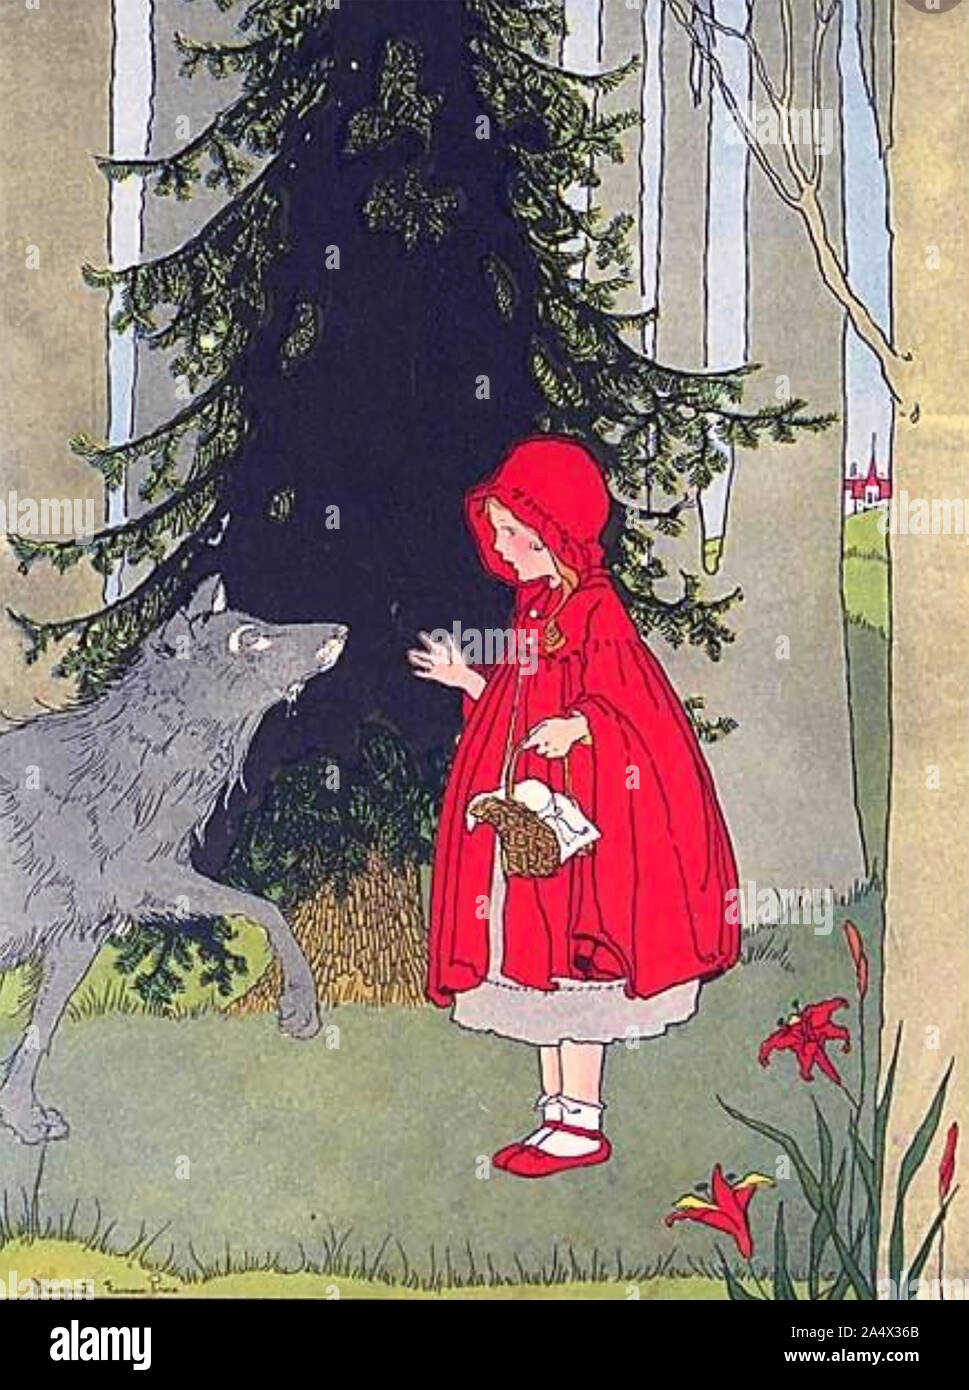 LITTLE RED RIDING HOOD in an early 20th century illustration Stock Photo